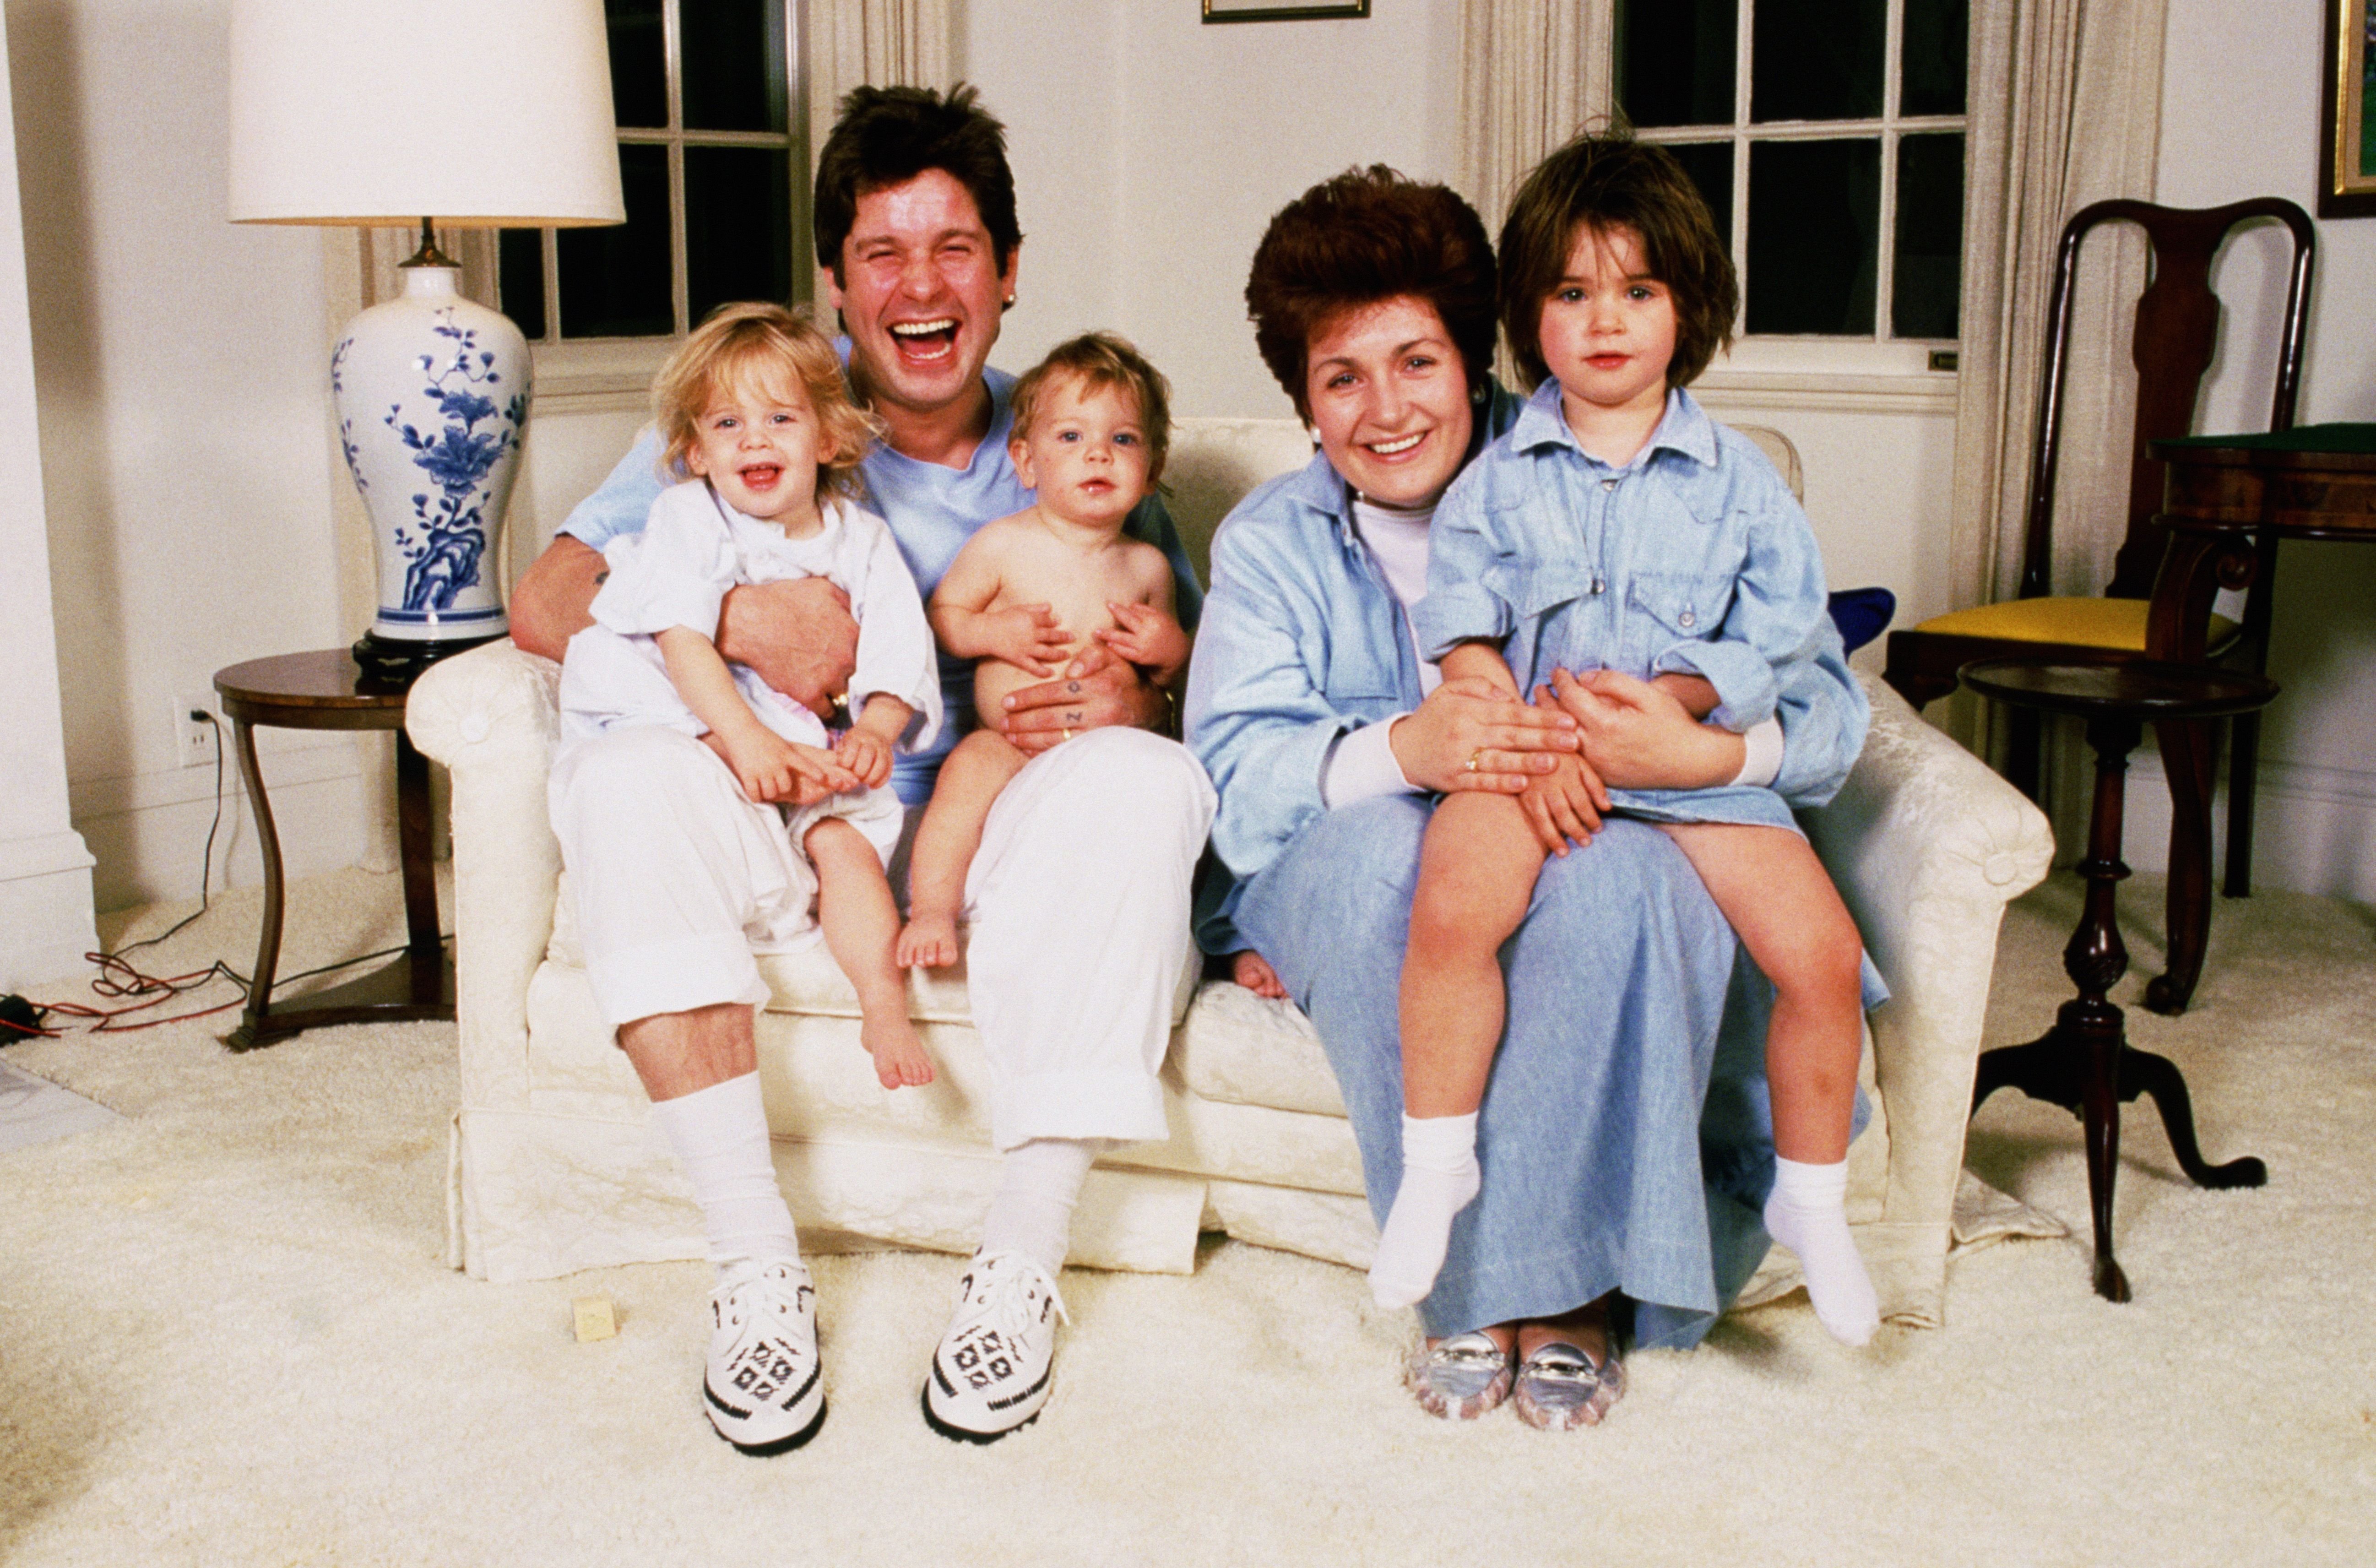 Ozzy Osbourne at home with his family, early 1990's. From left to right, Kelly Osbourne, Ozzy Osbourne, Jack Osbourne, Sharon Osbourne and Amme Osbourne. | Source: Getty Images